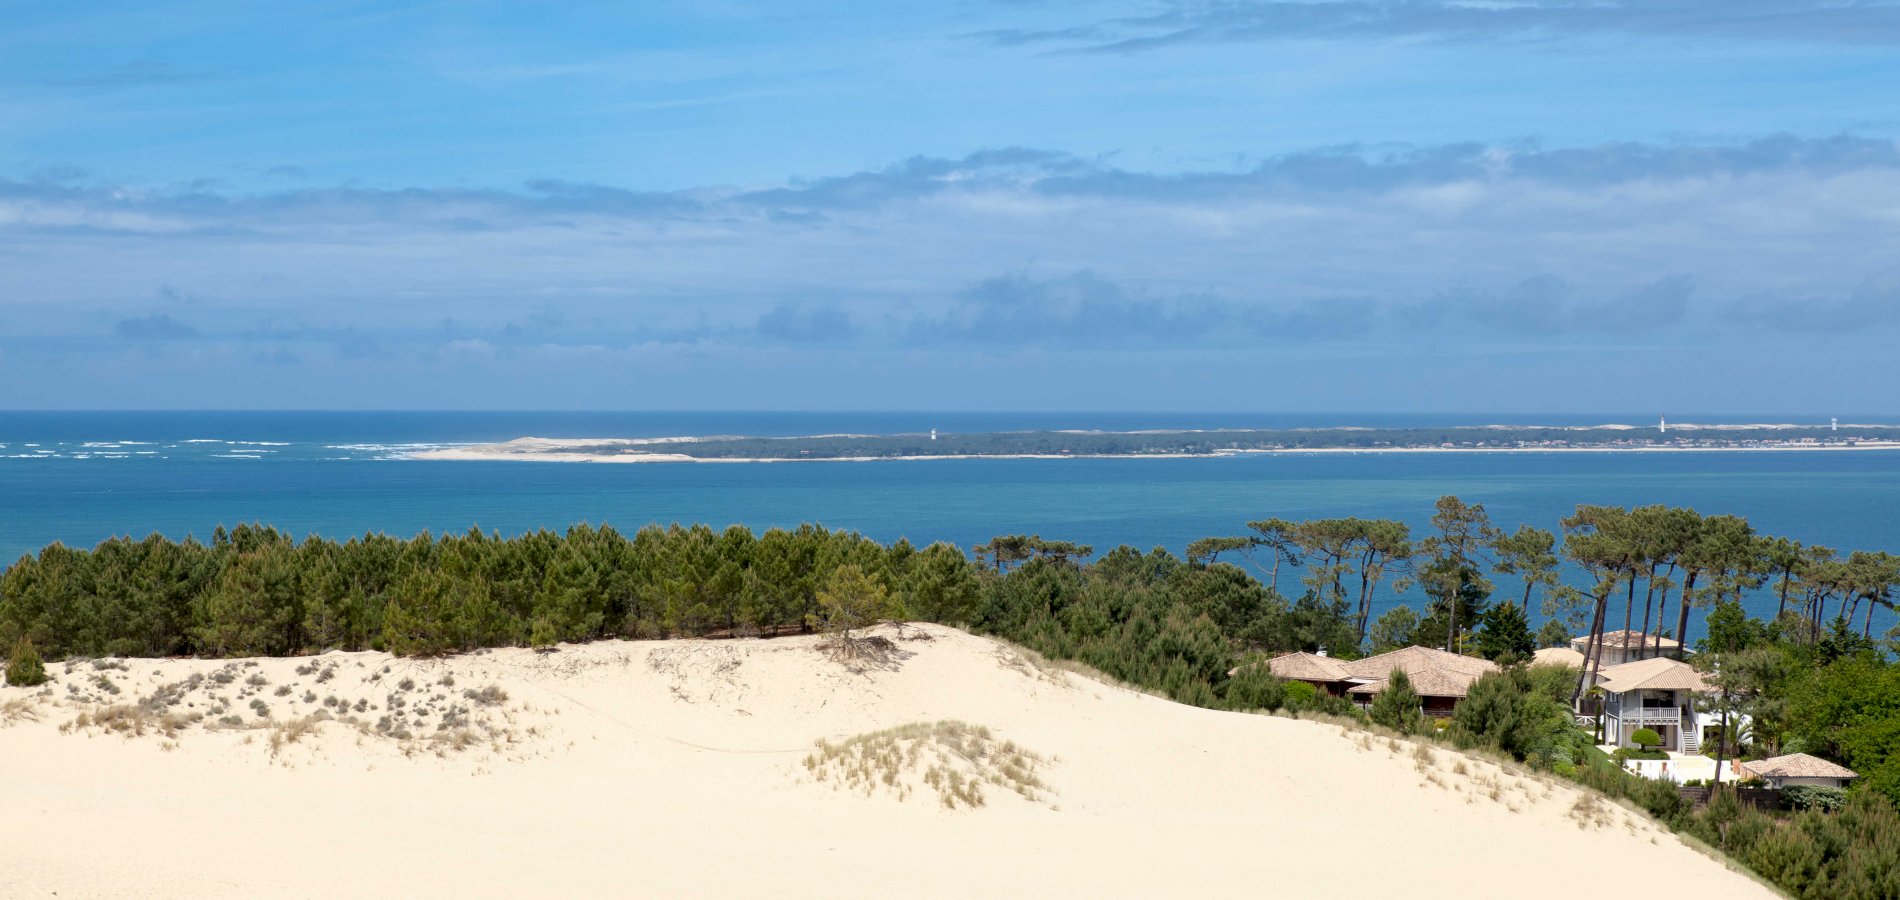 Ophorus Tours - A Private Day Trip from Bordeaux to Arcachon Bay & Pilat Sand Dune